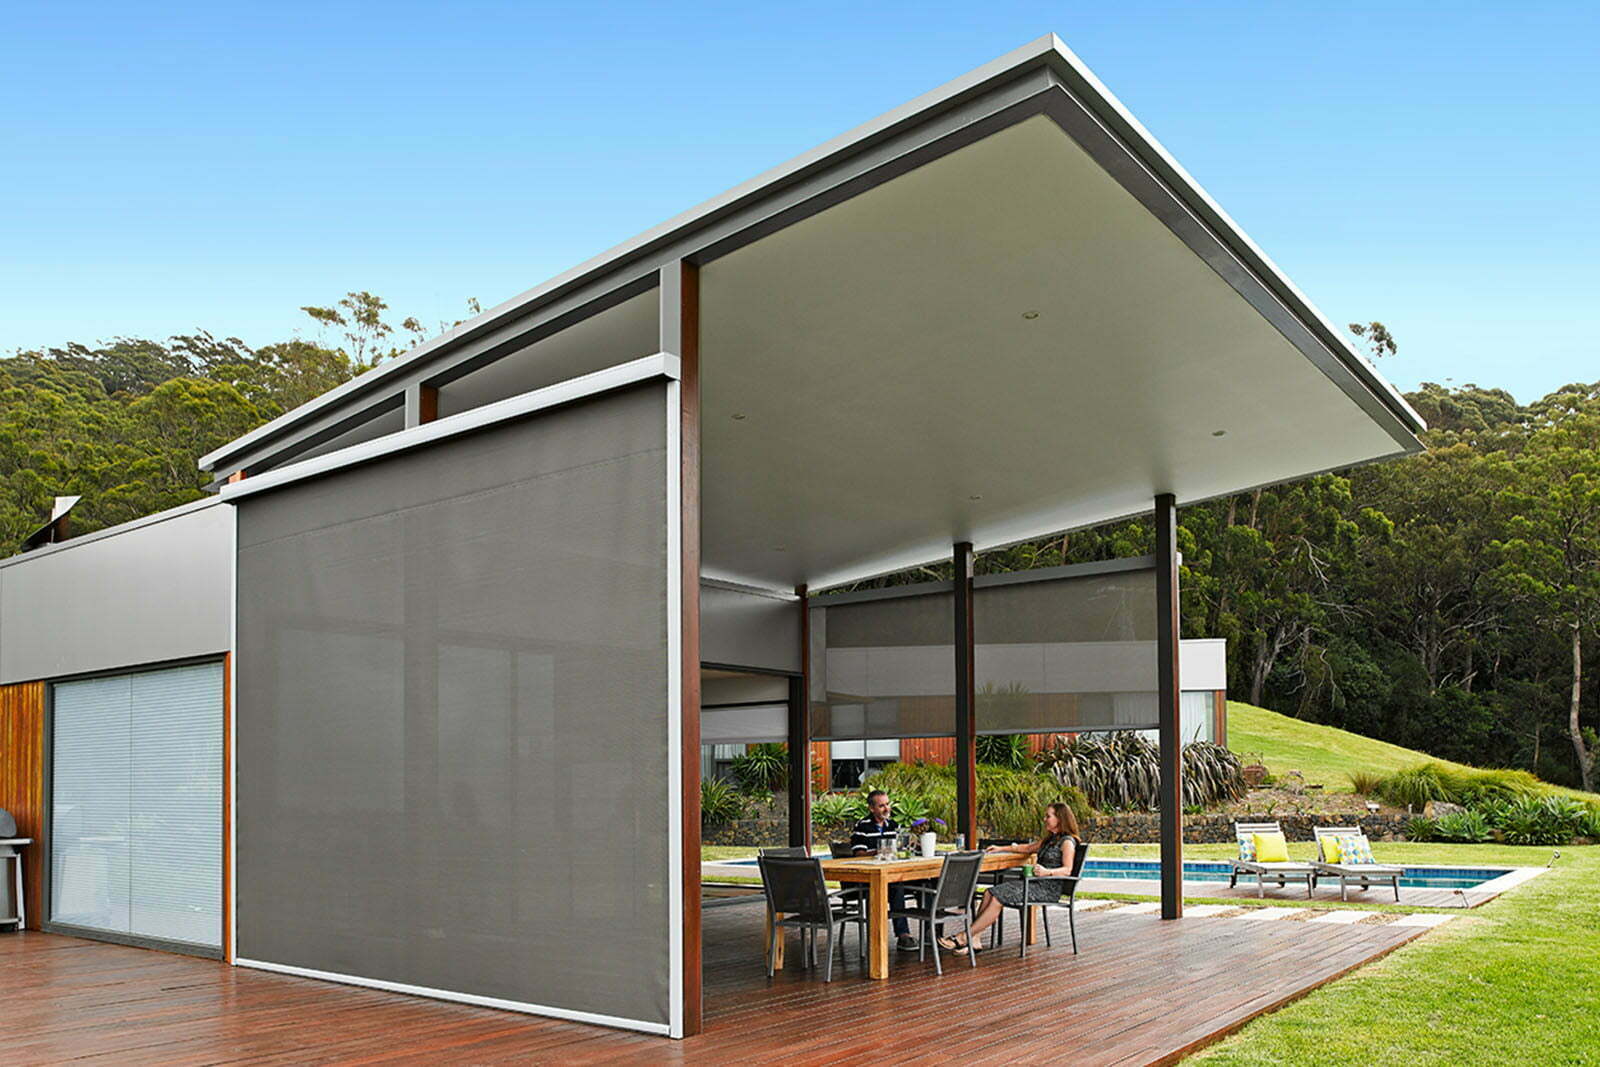 Choosing the awning that’s right for your outdoor space